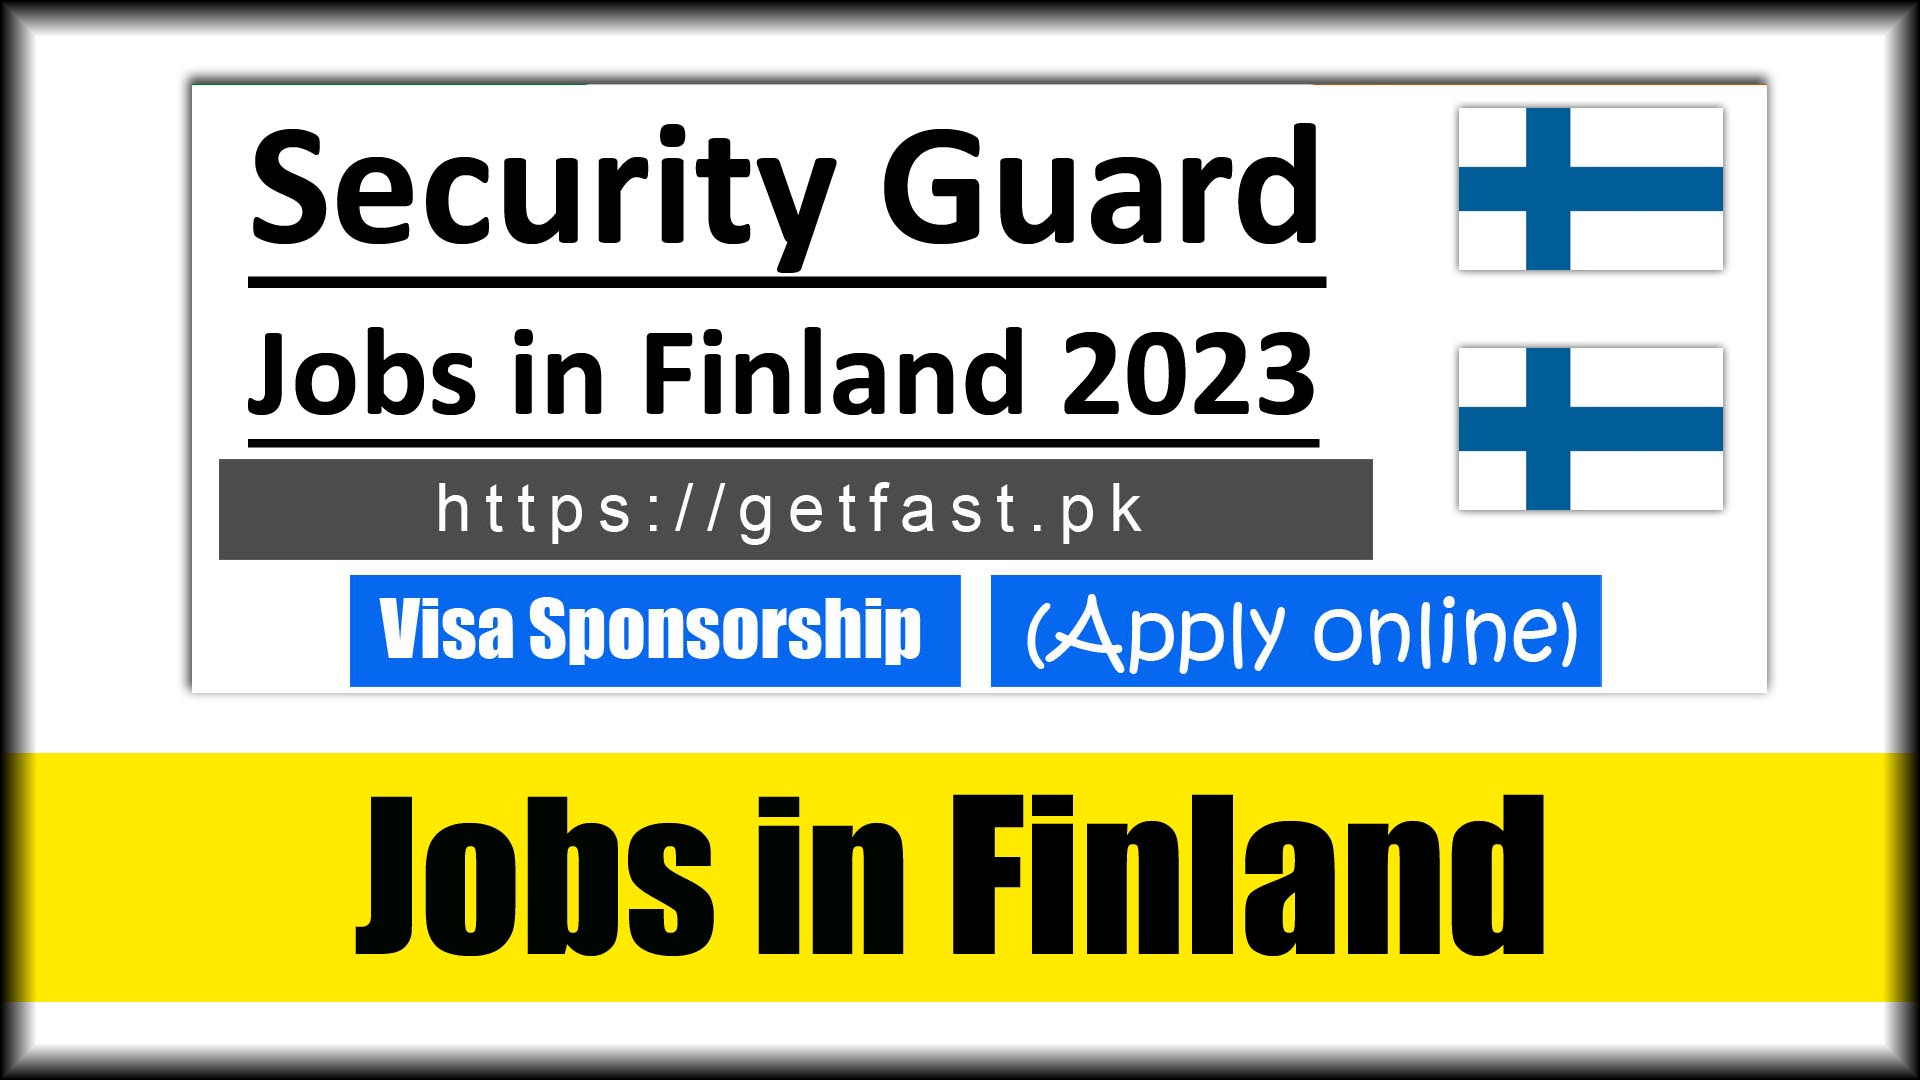 Security Guard Jobs in Finland 2023